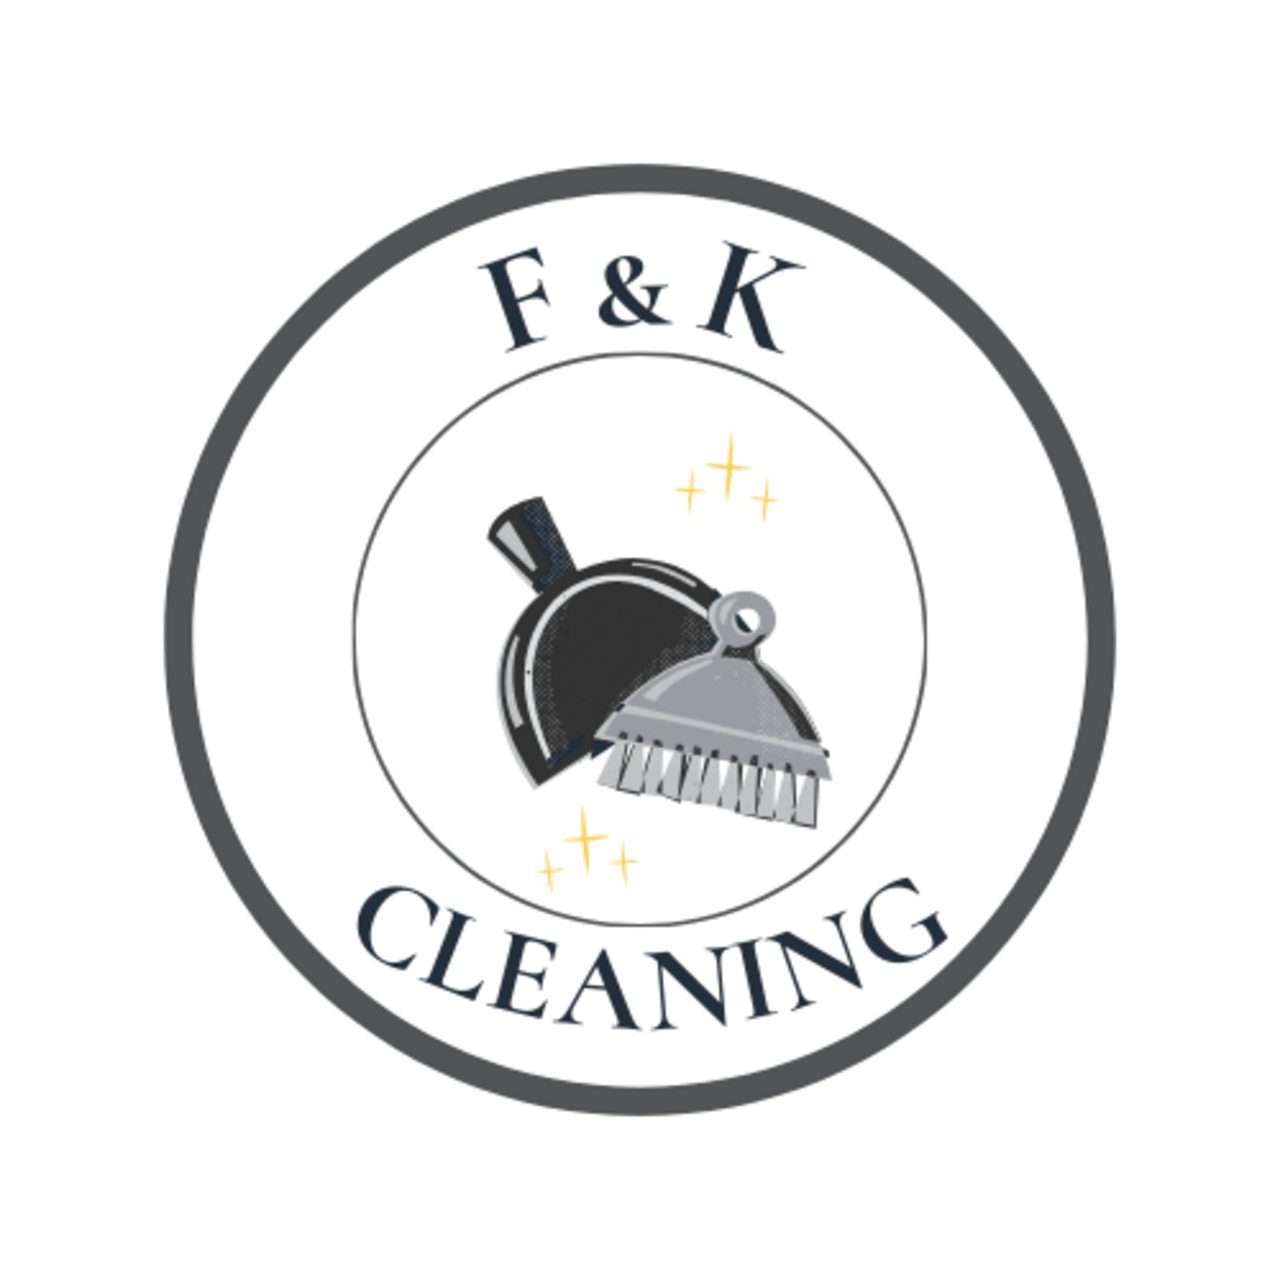 F&K Cleaning's logo